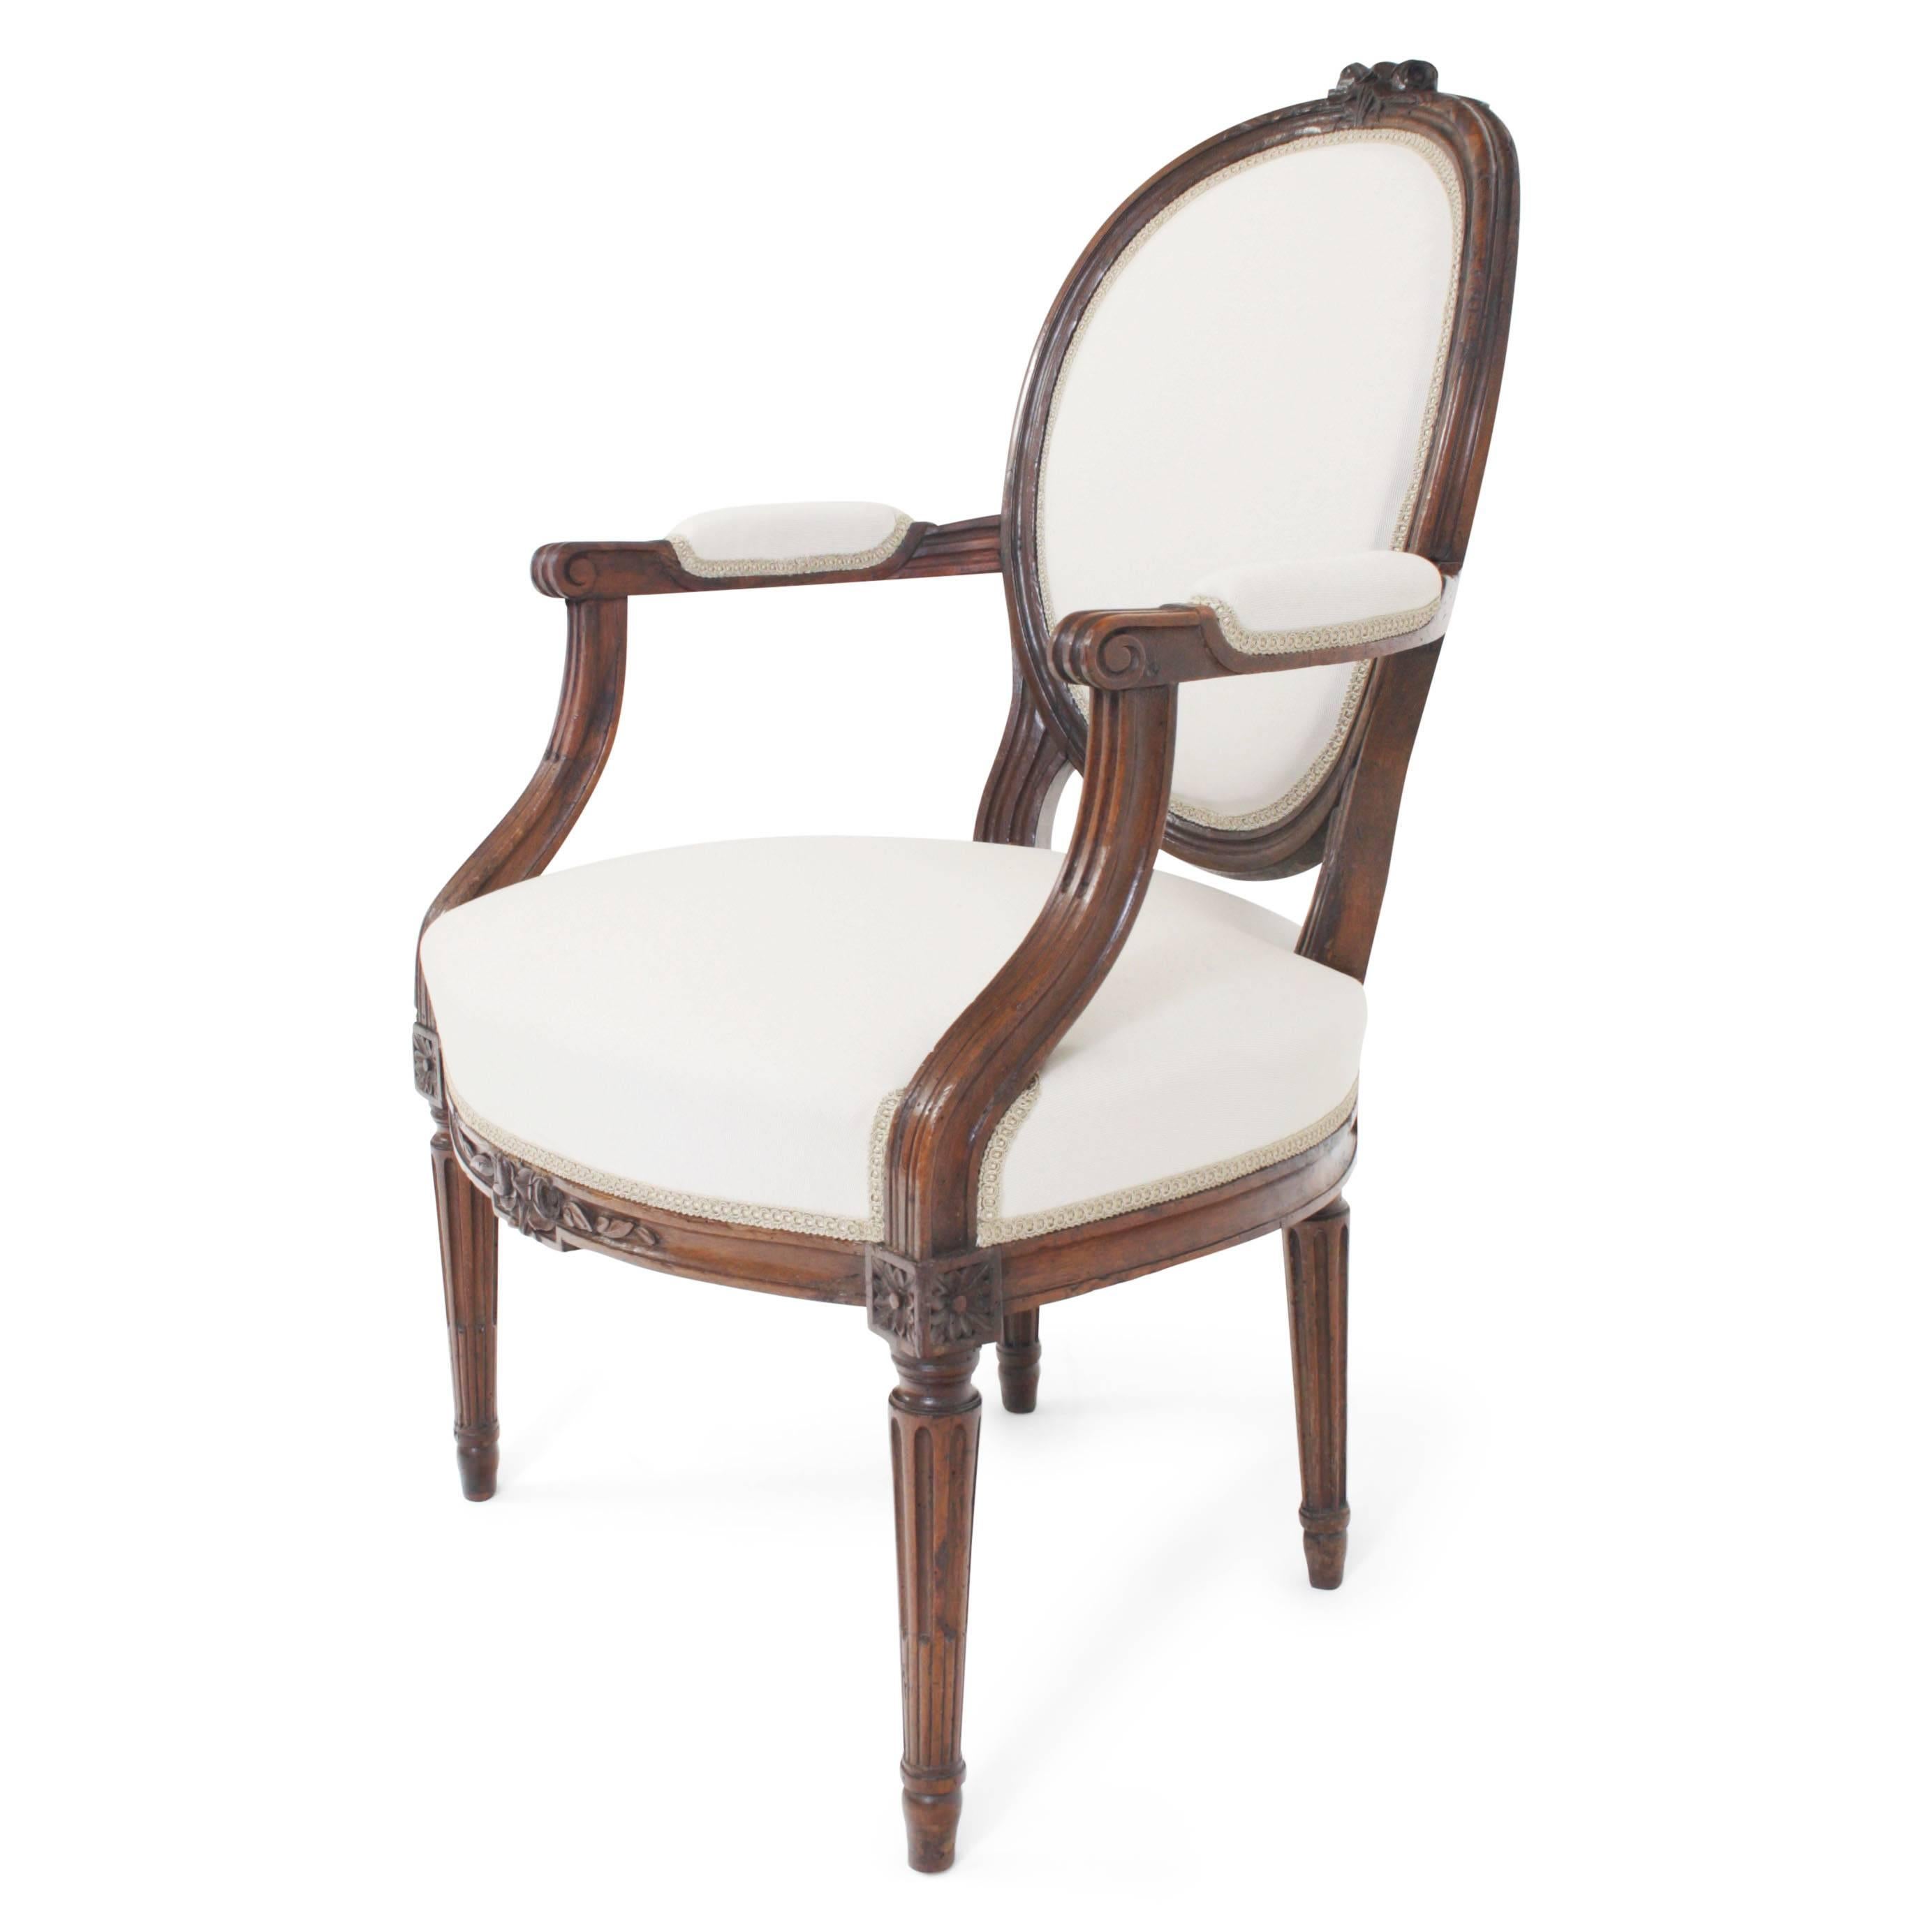 Louis XVI Set of Four Louis Seize-Style Armchairs, France, First Half of the 19th Century